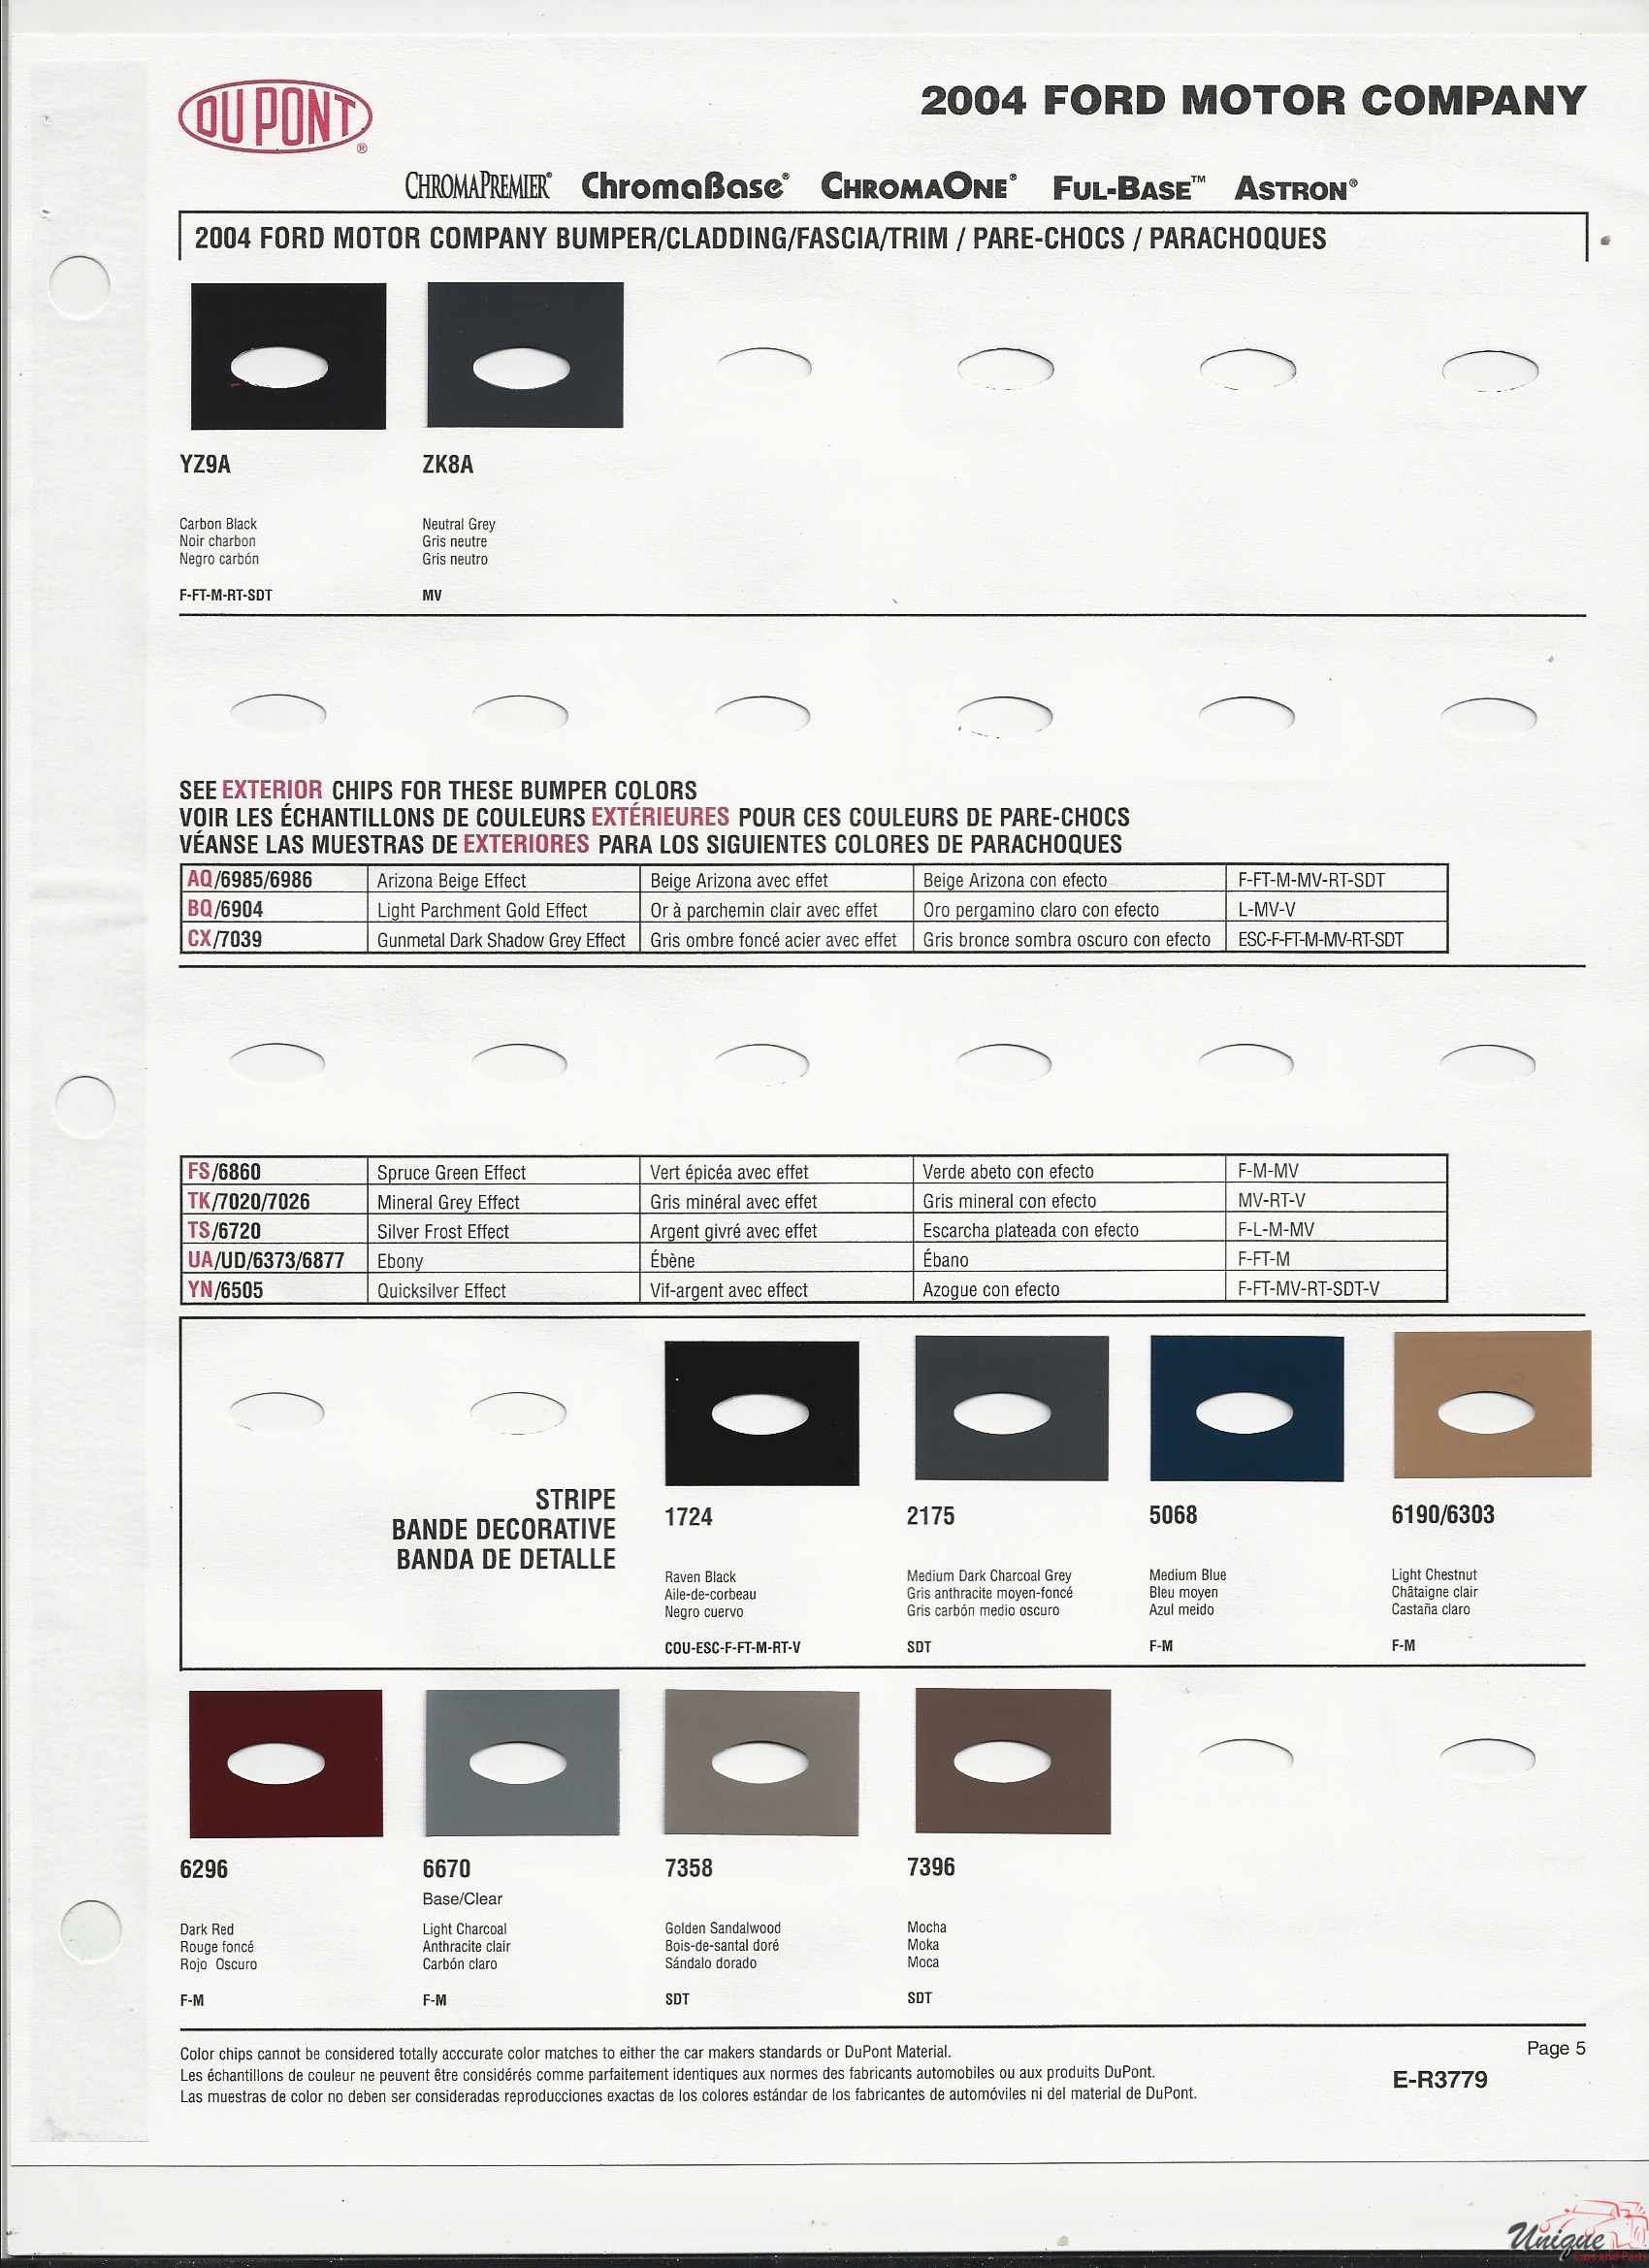 2004 Ford-4 Paint Charts